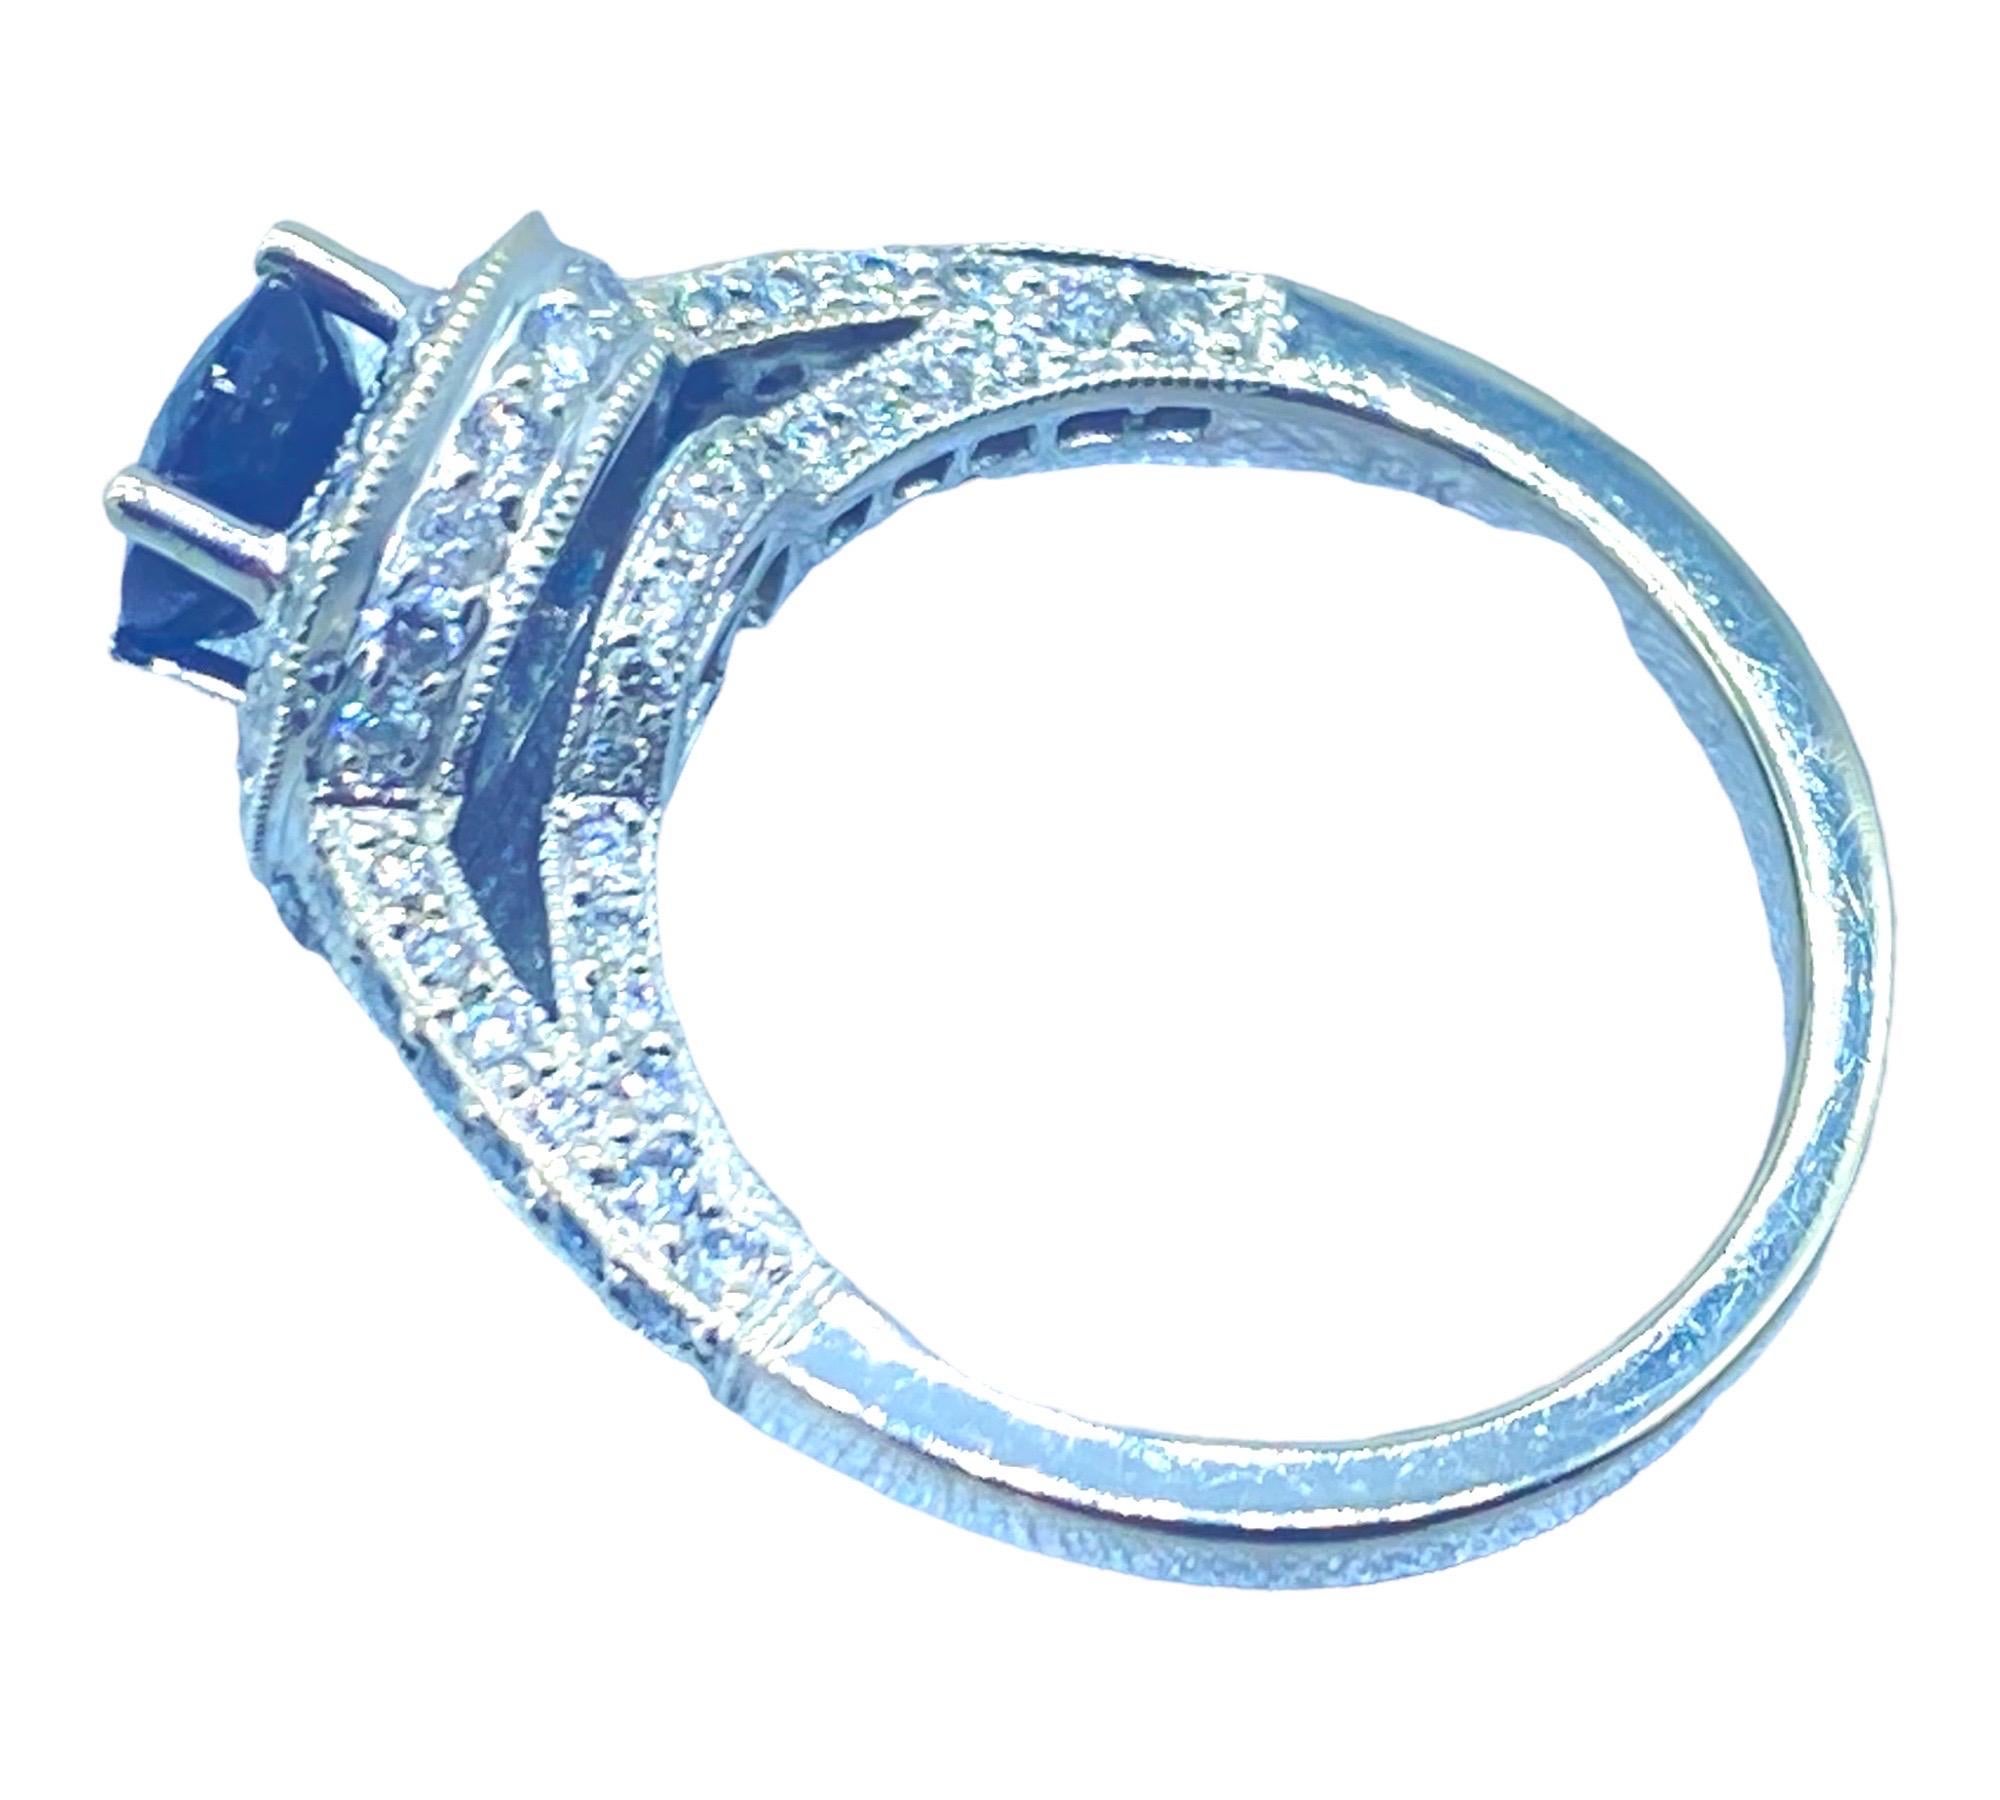 
Lady's 18 karat white gold diamond and sapphire halo ring are 9.90 mm in diameter at the top, with shoulders measuring 2.85 mm. The height of the ring, with an undercarriage of diamonds, is calculated as 9 mm.  The ring size is 6.5

The following